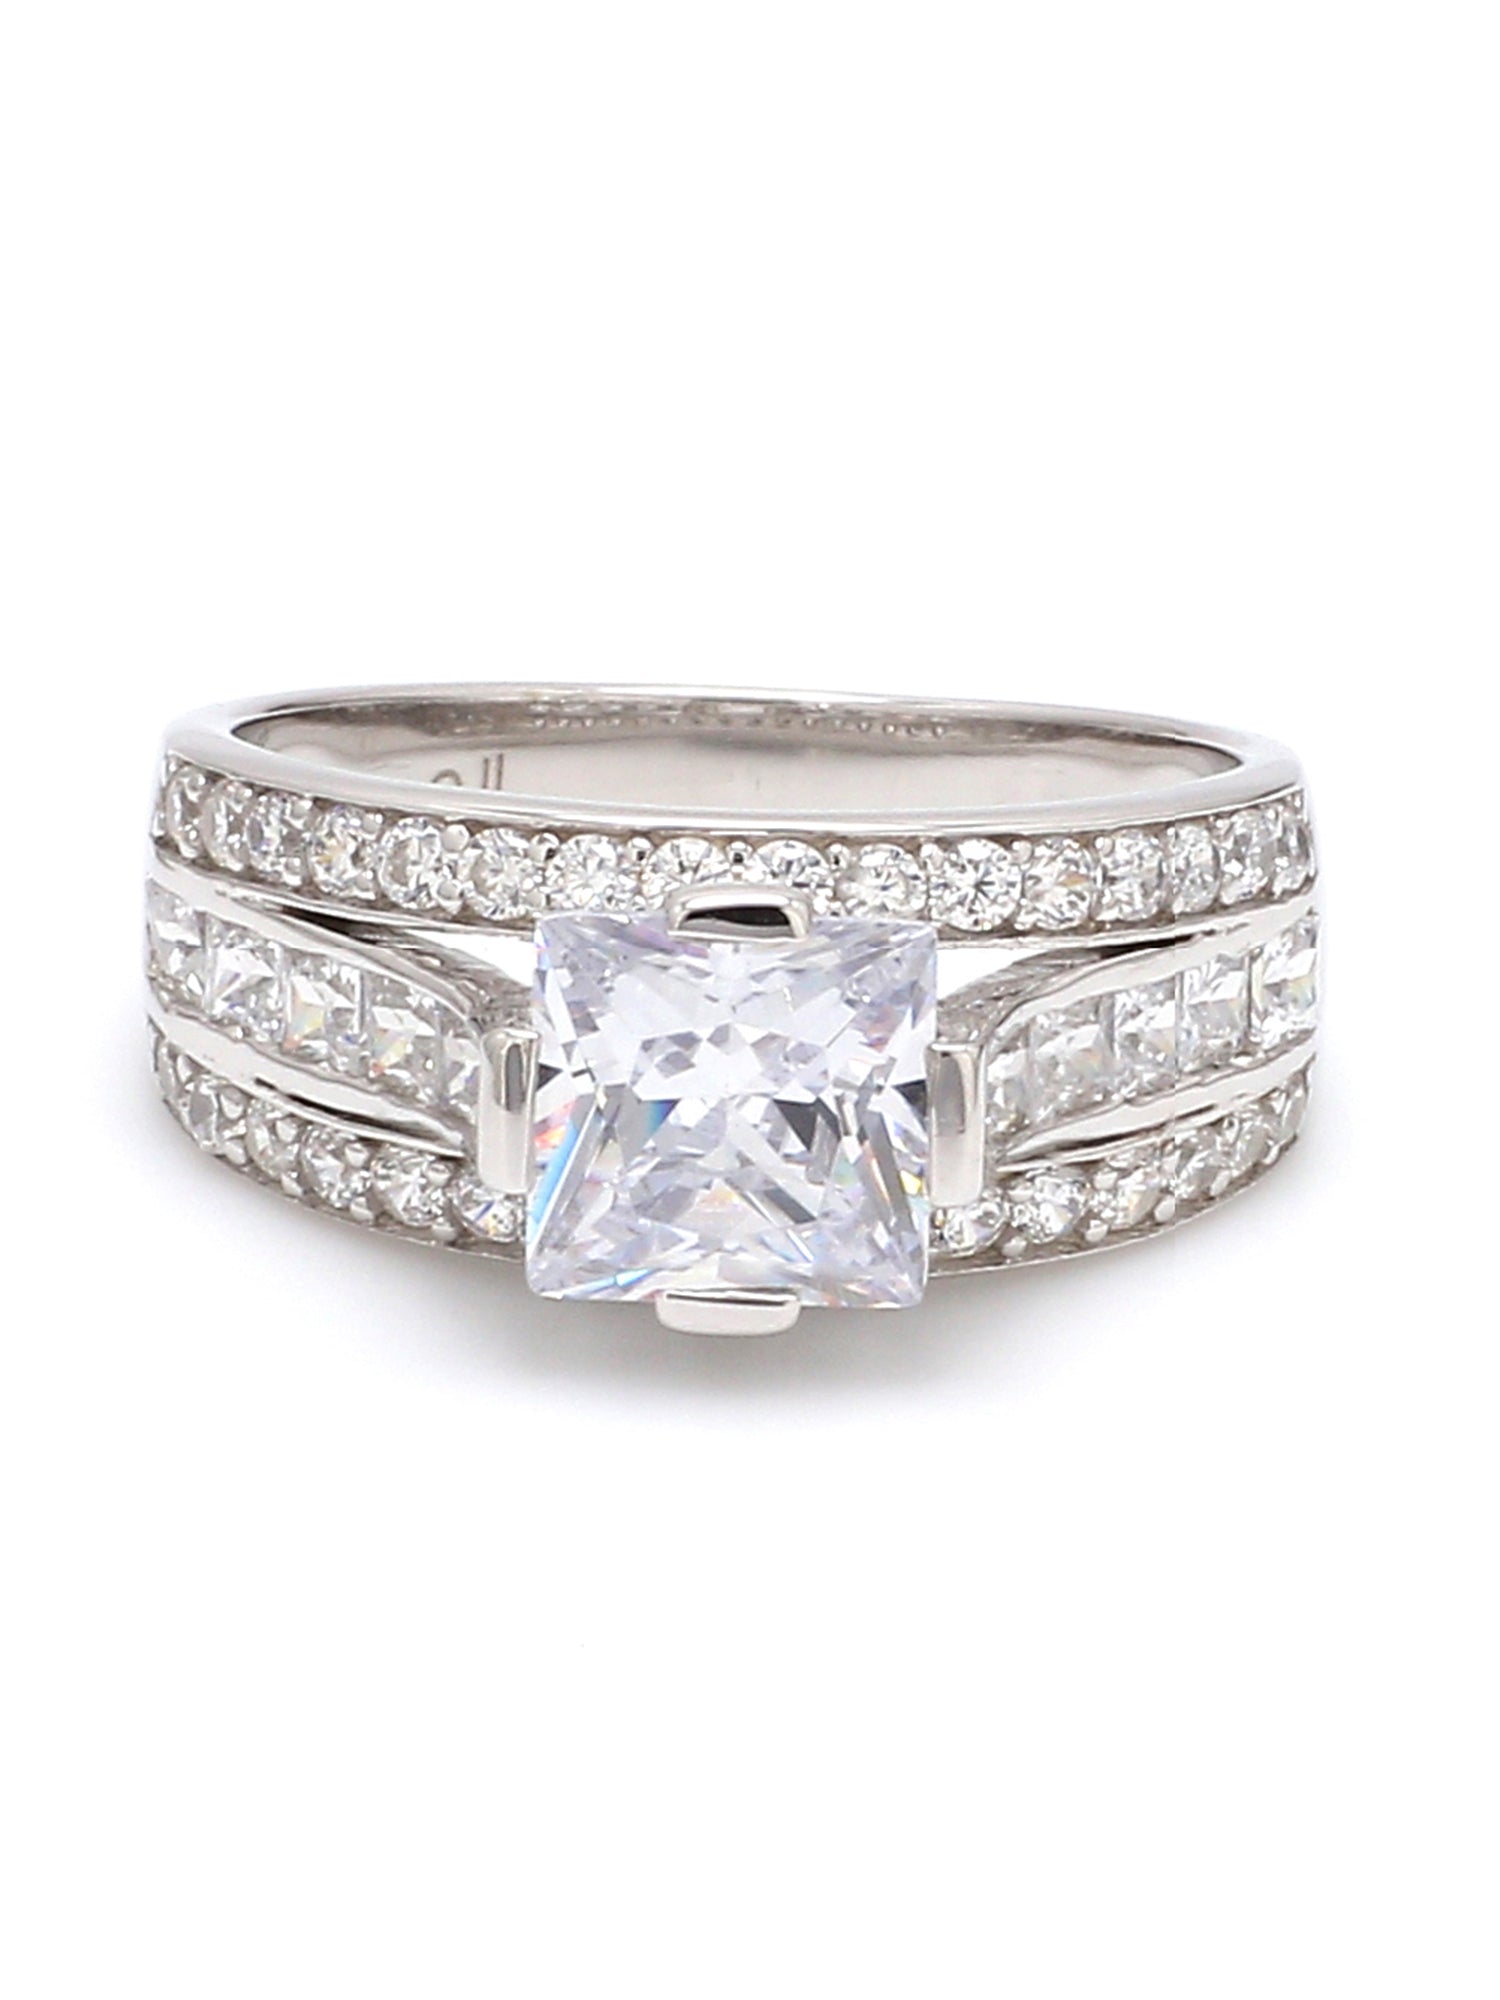 1.5 CARAT PRINCESS SOLITAIRE SILVER RING WITH AMERICAN DIAMONDS-1